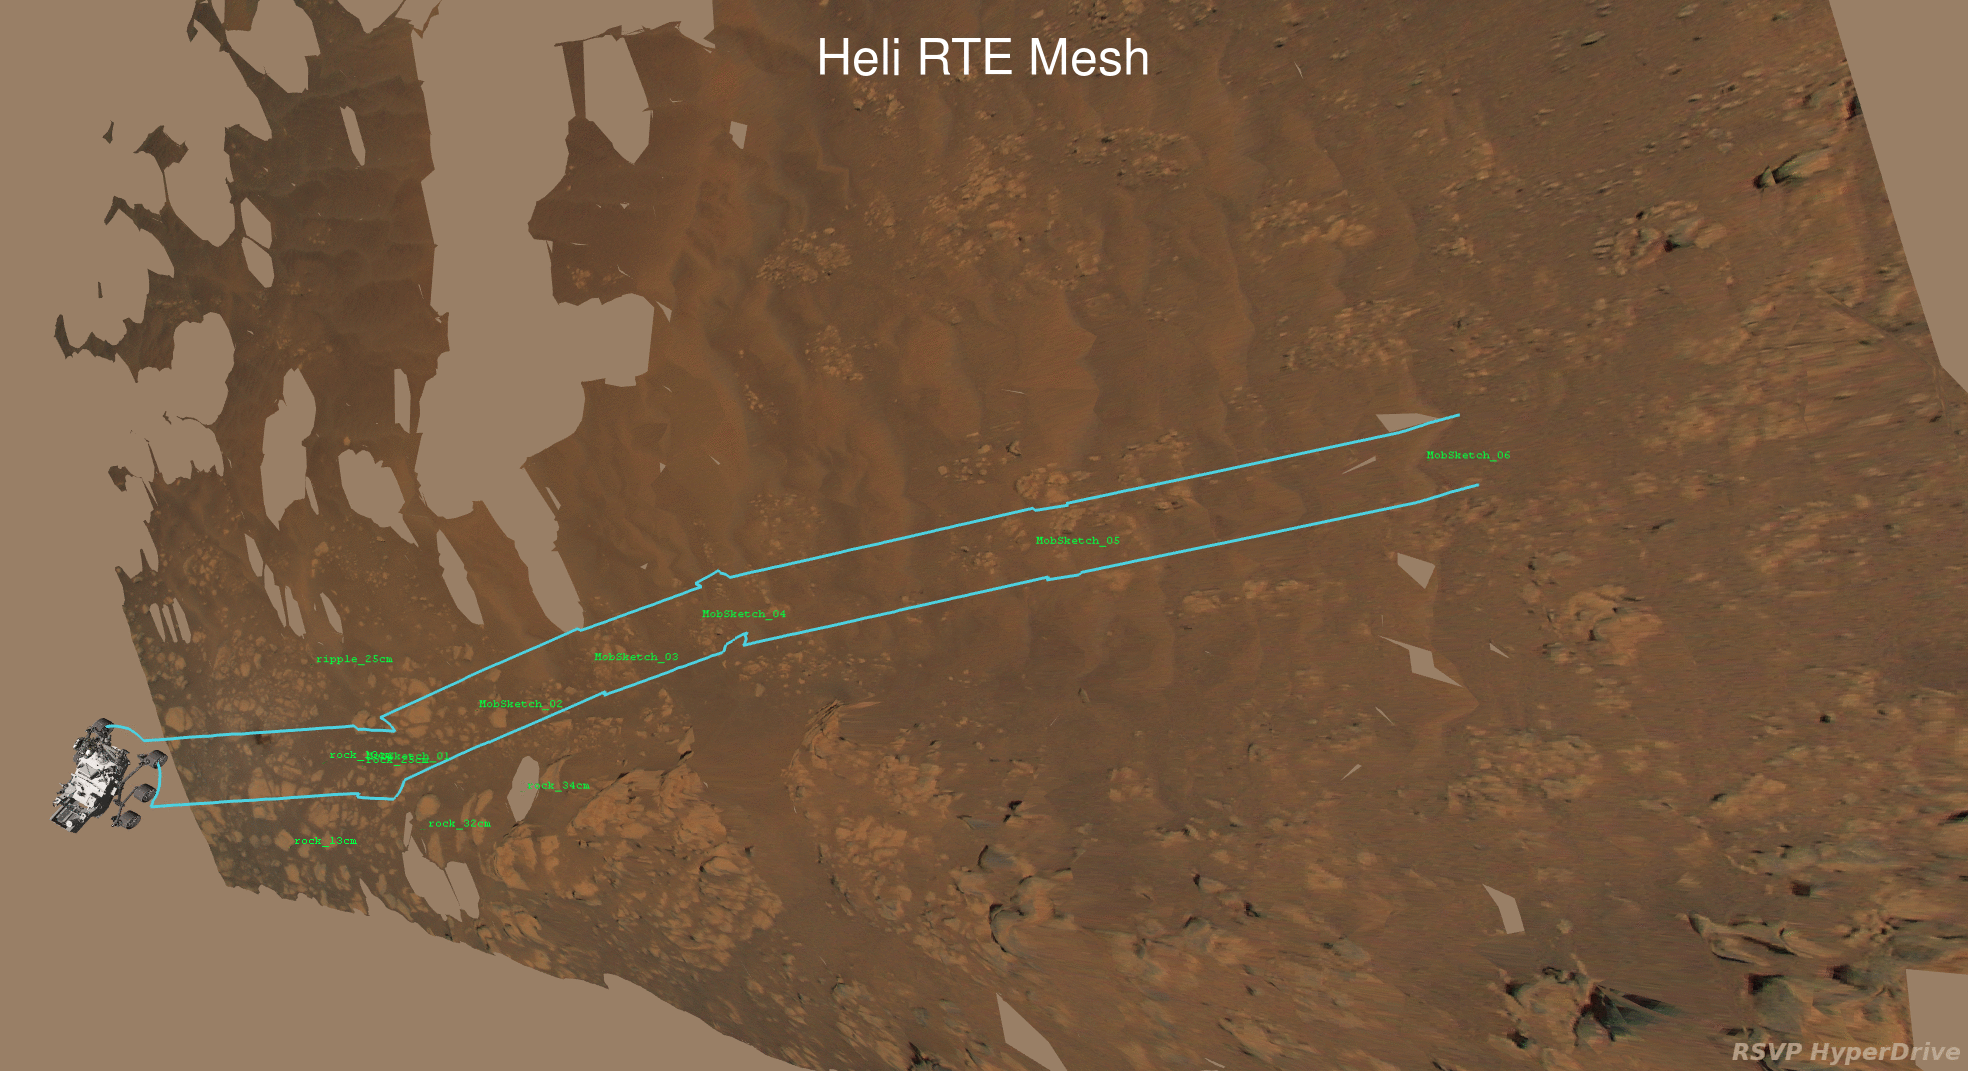 Animated gif cycling between blurry orbital imagery, less blurry rover imagery, and high resolution helicopter images